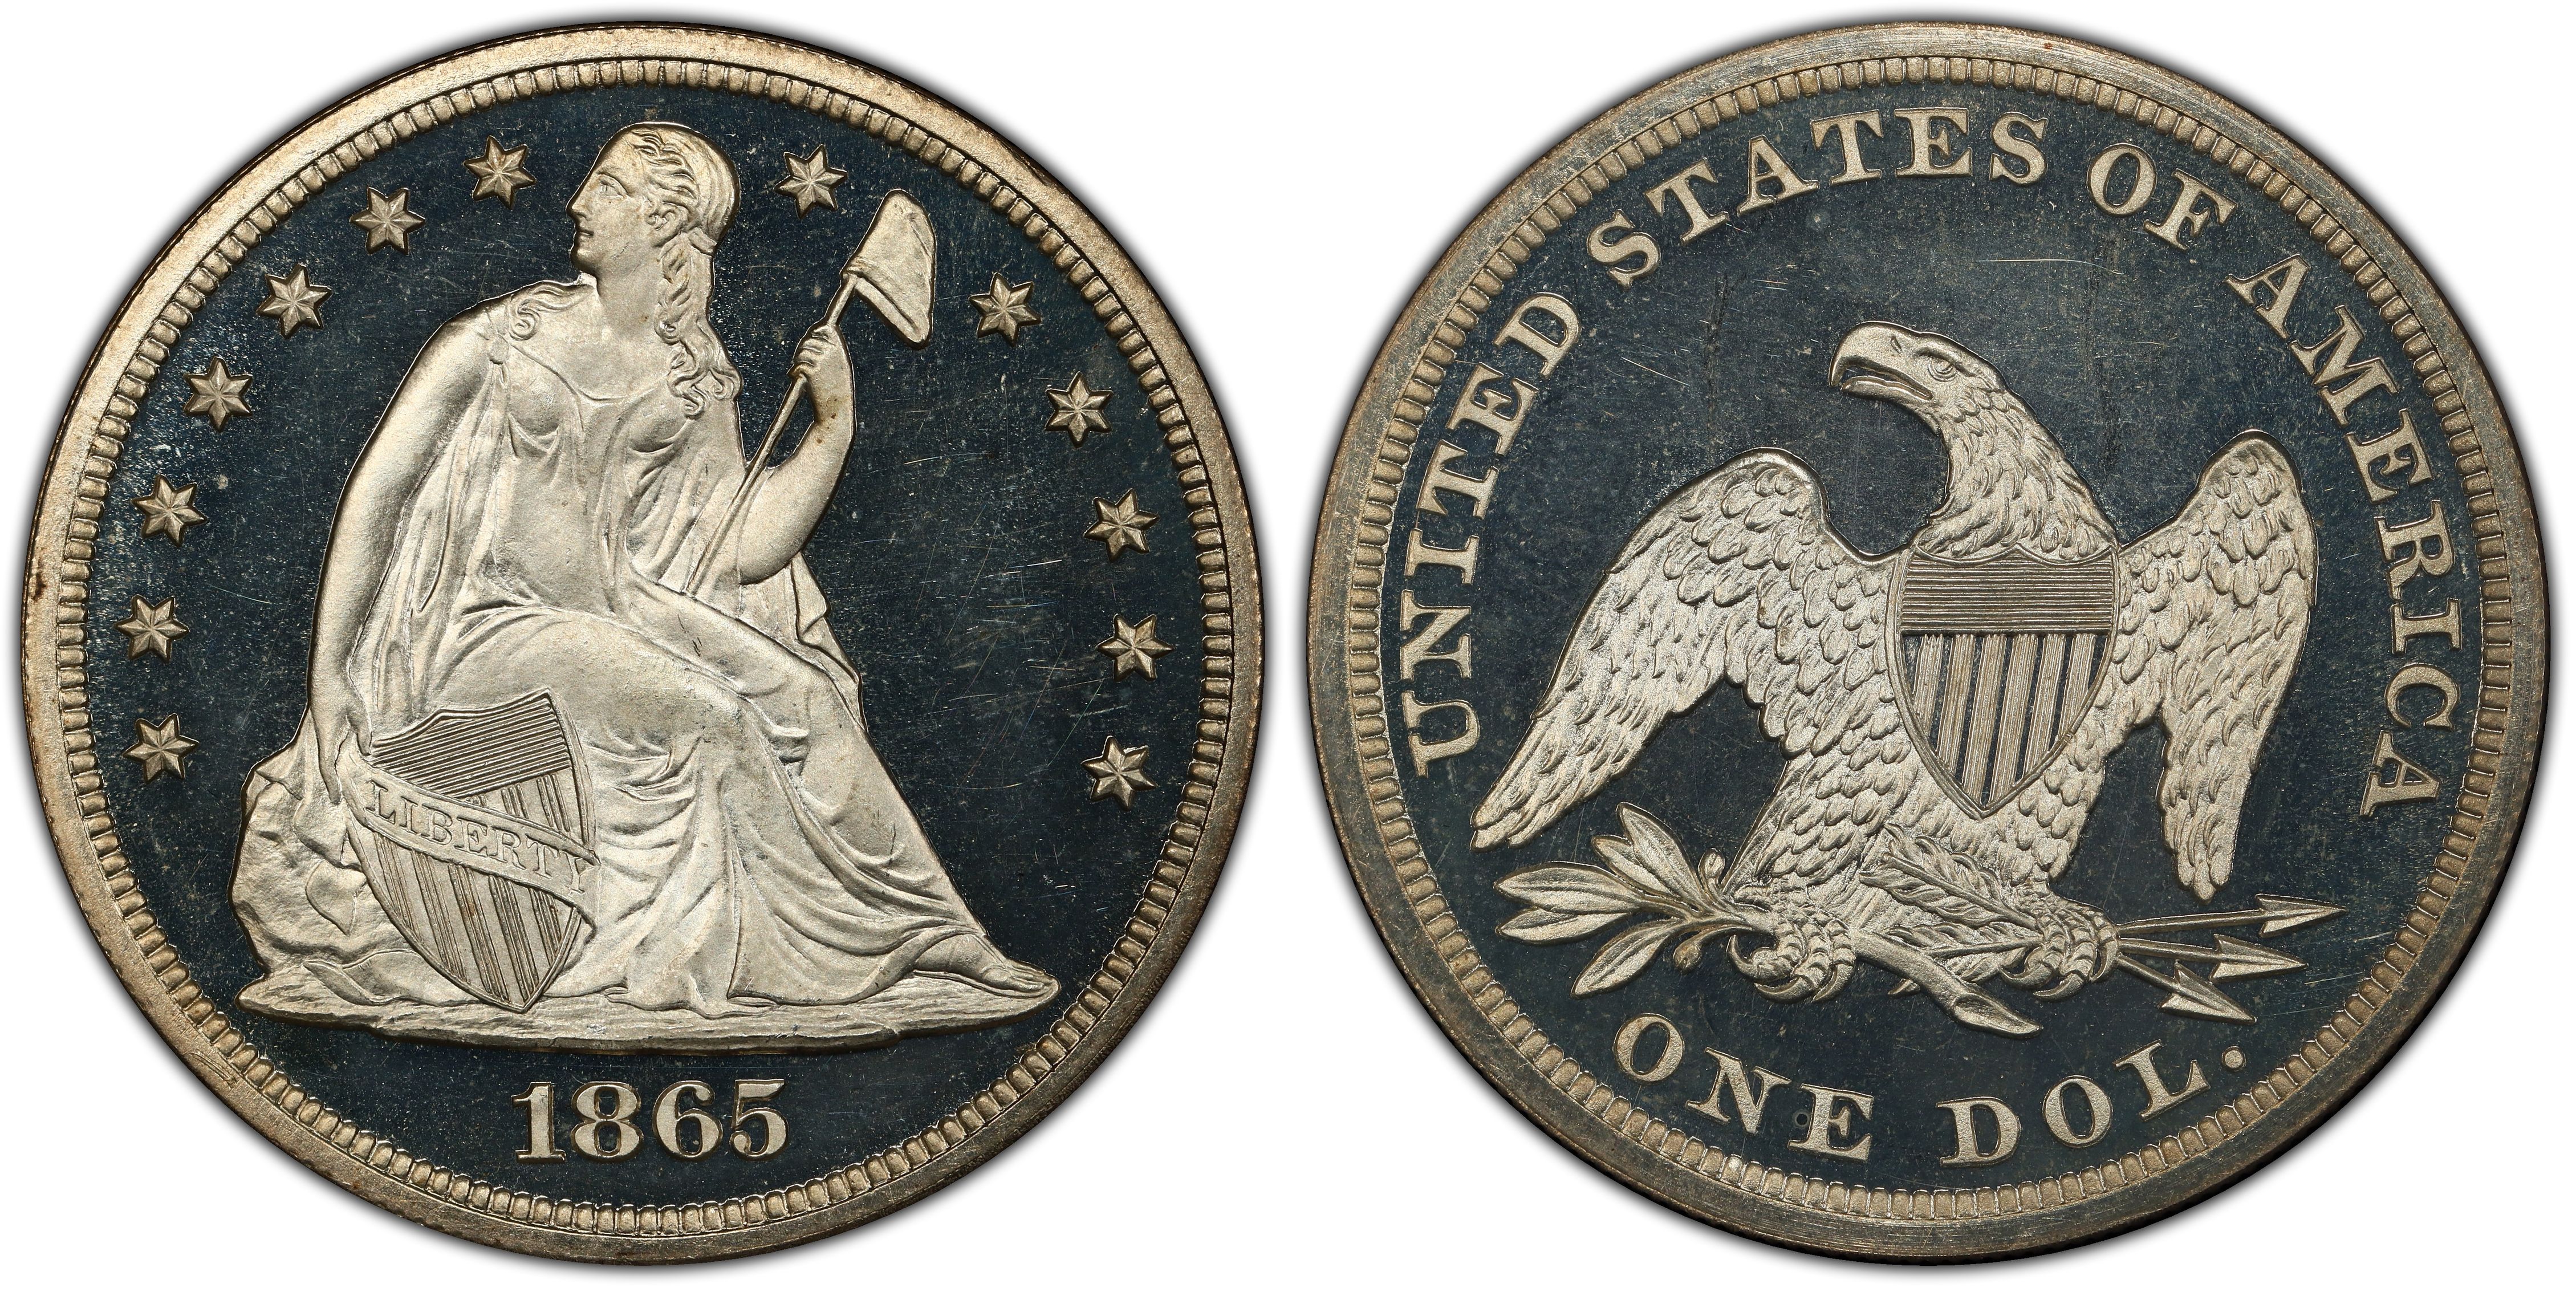 1851 $1 (Regular Strike) Liberty Seated Dollar - PCGS CoinFacts